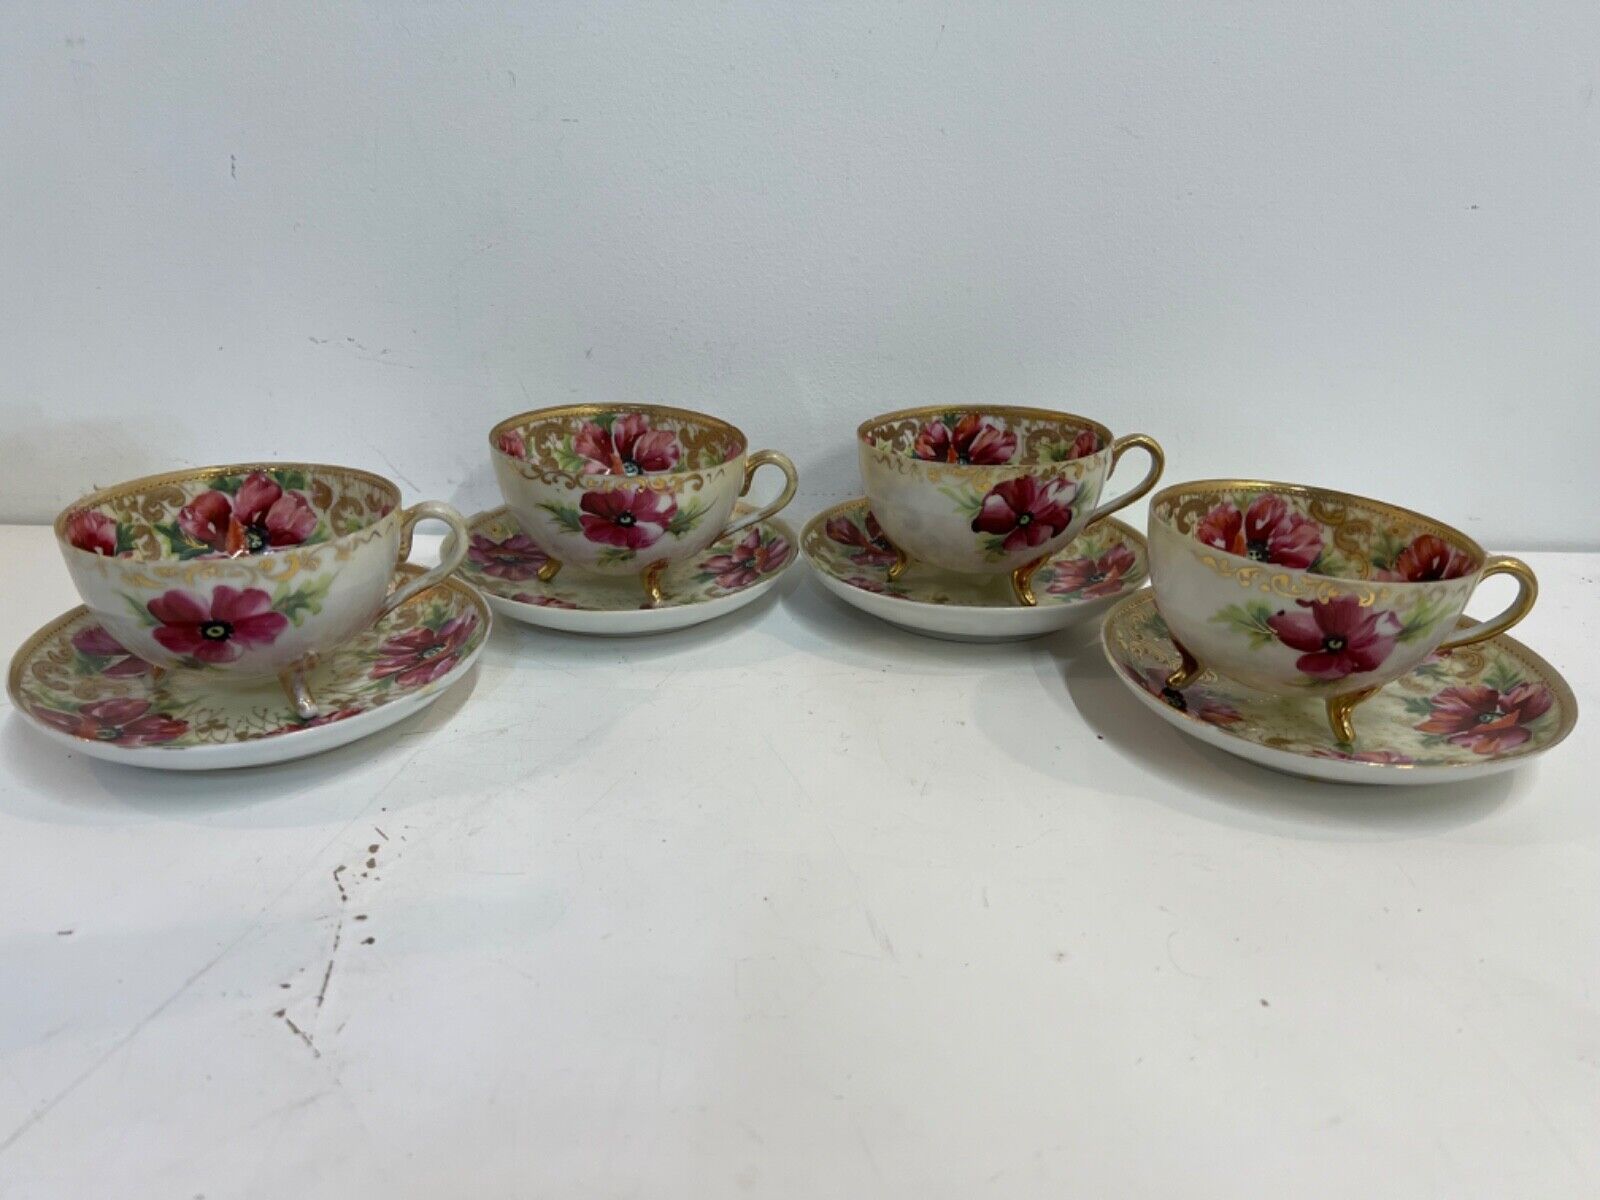 Vintage Japanese Nippon Porcelain Set of 4 Cups and Saucers with Add. Saucer